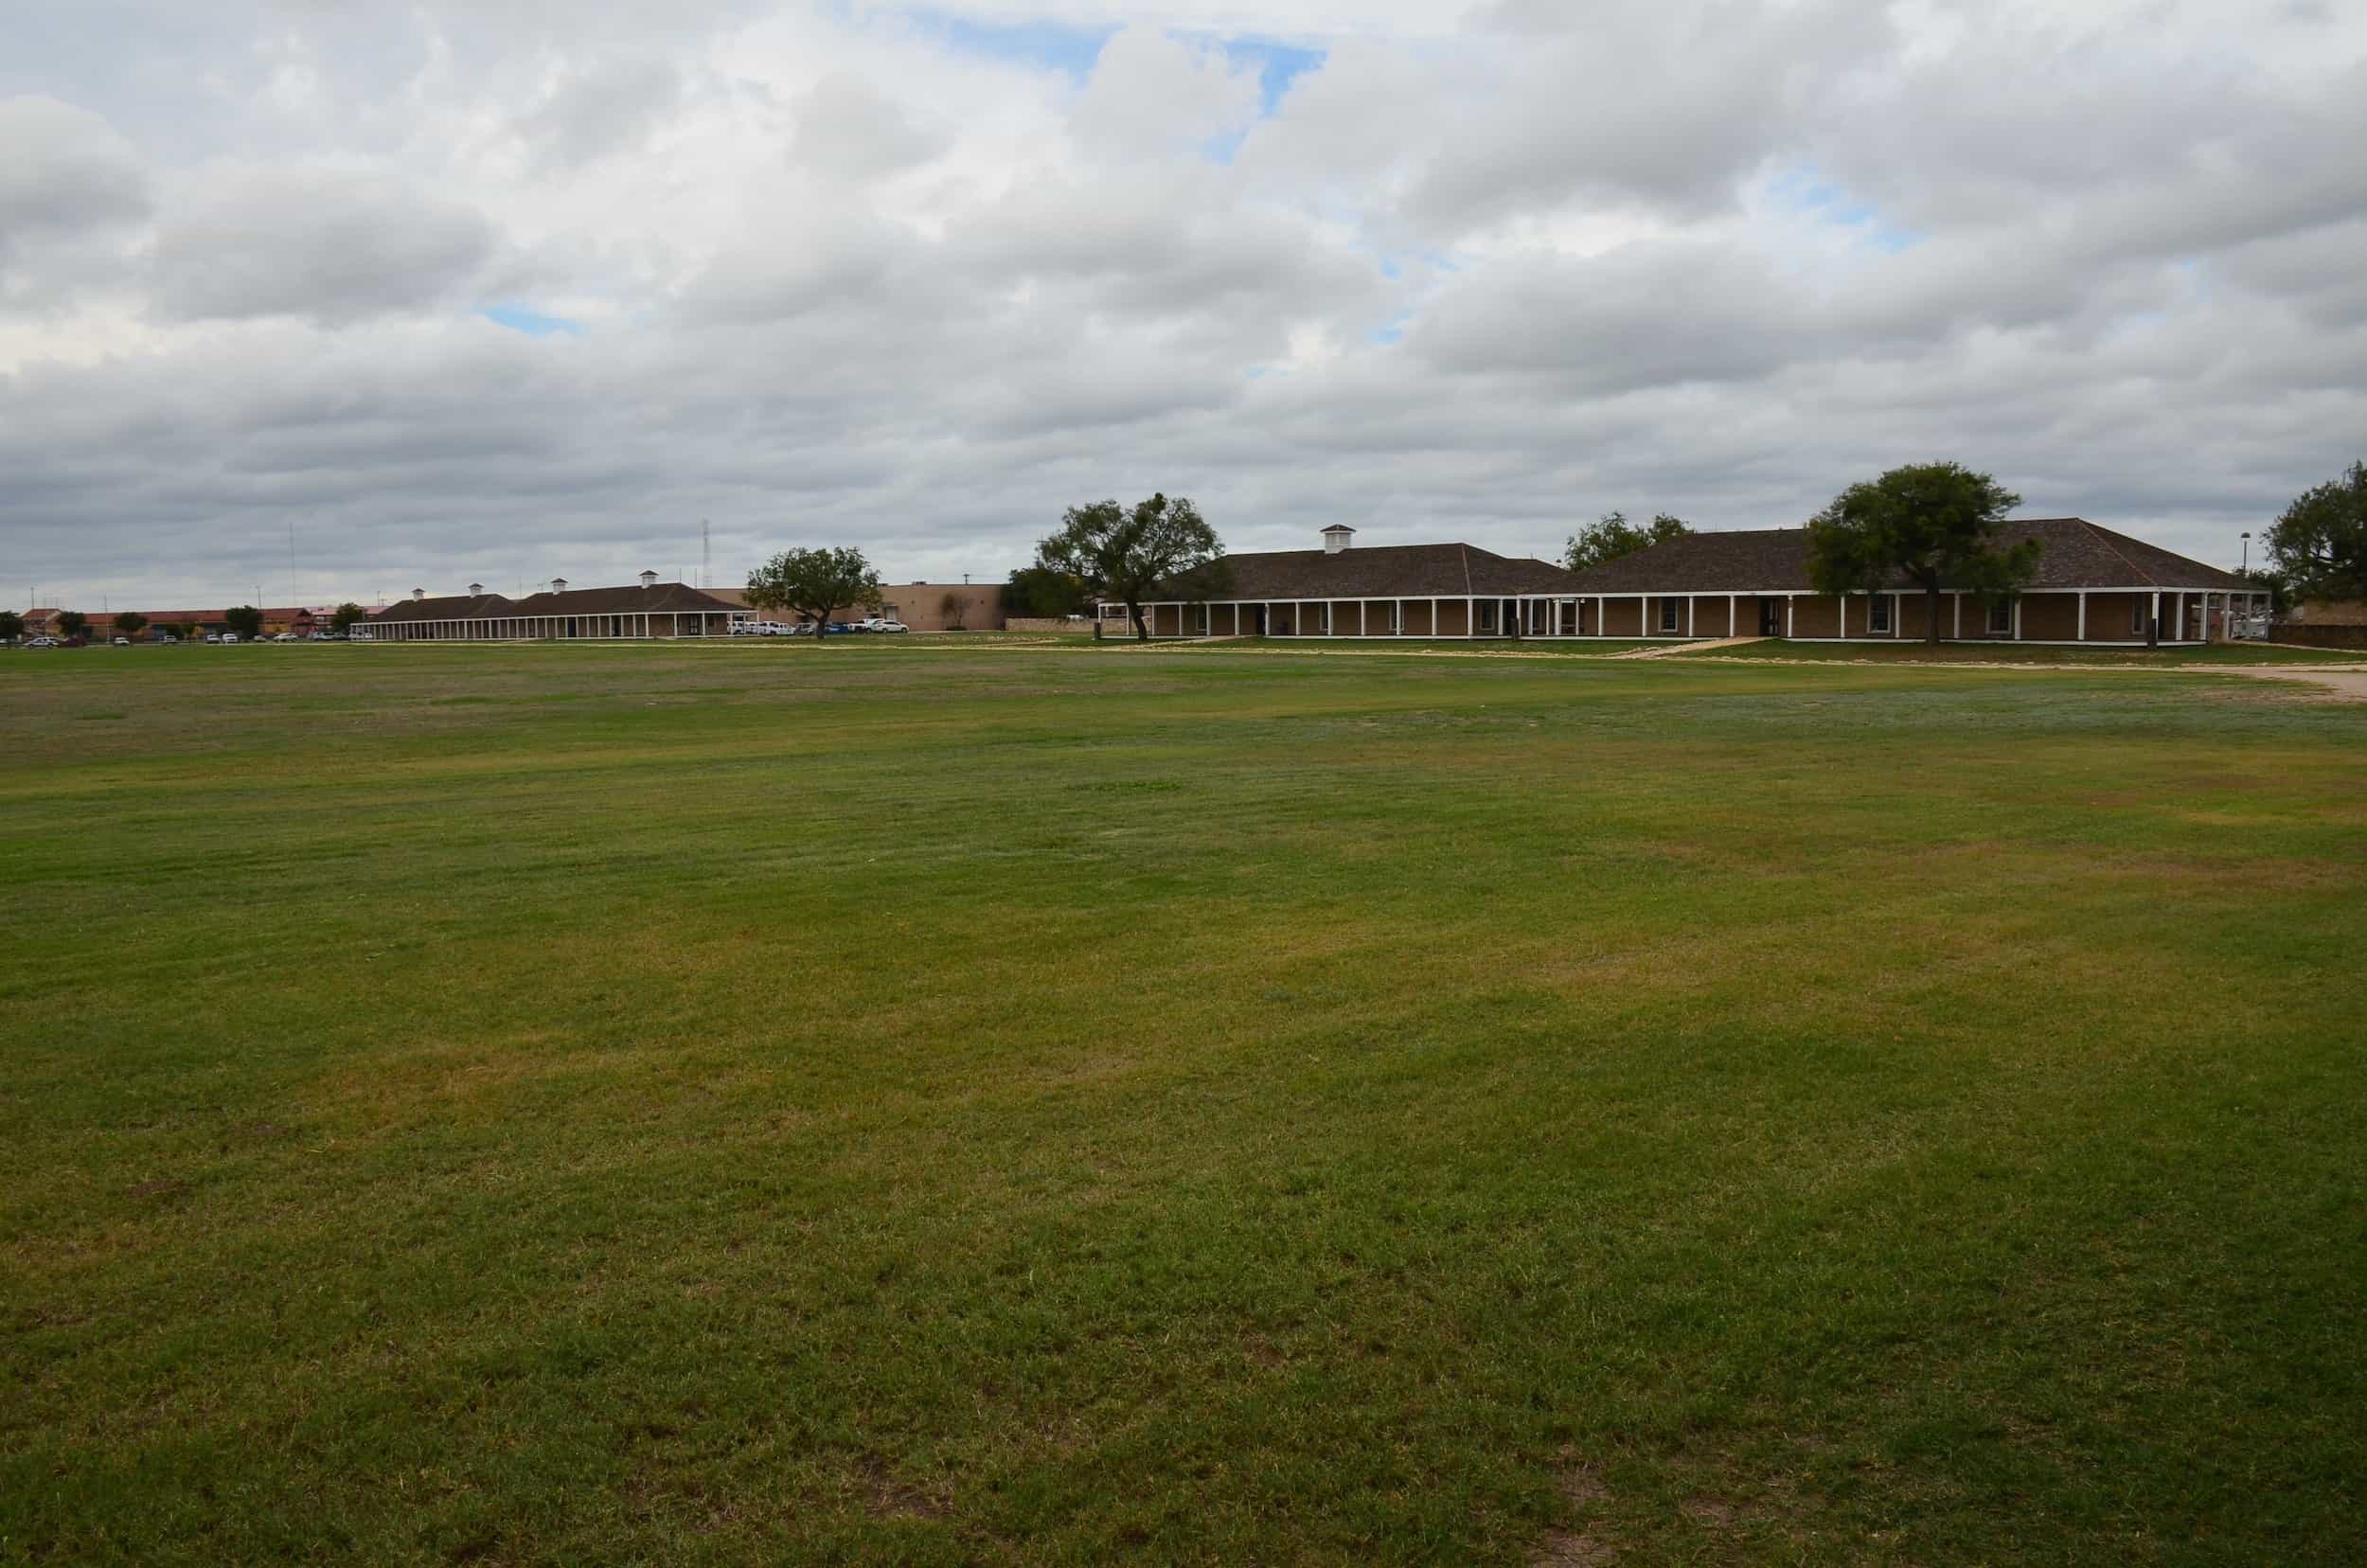 Barracks Row at Fort Concho in San Angelo, Texas